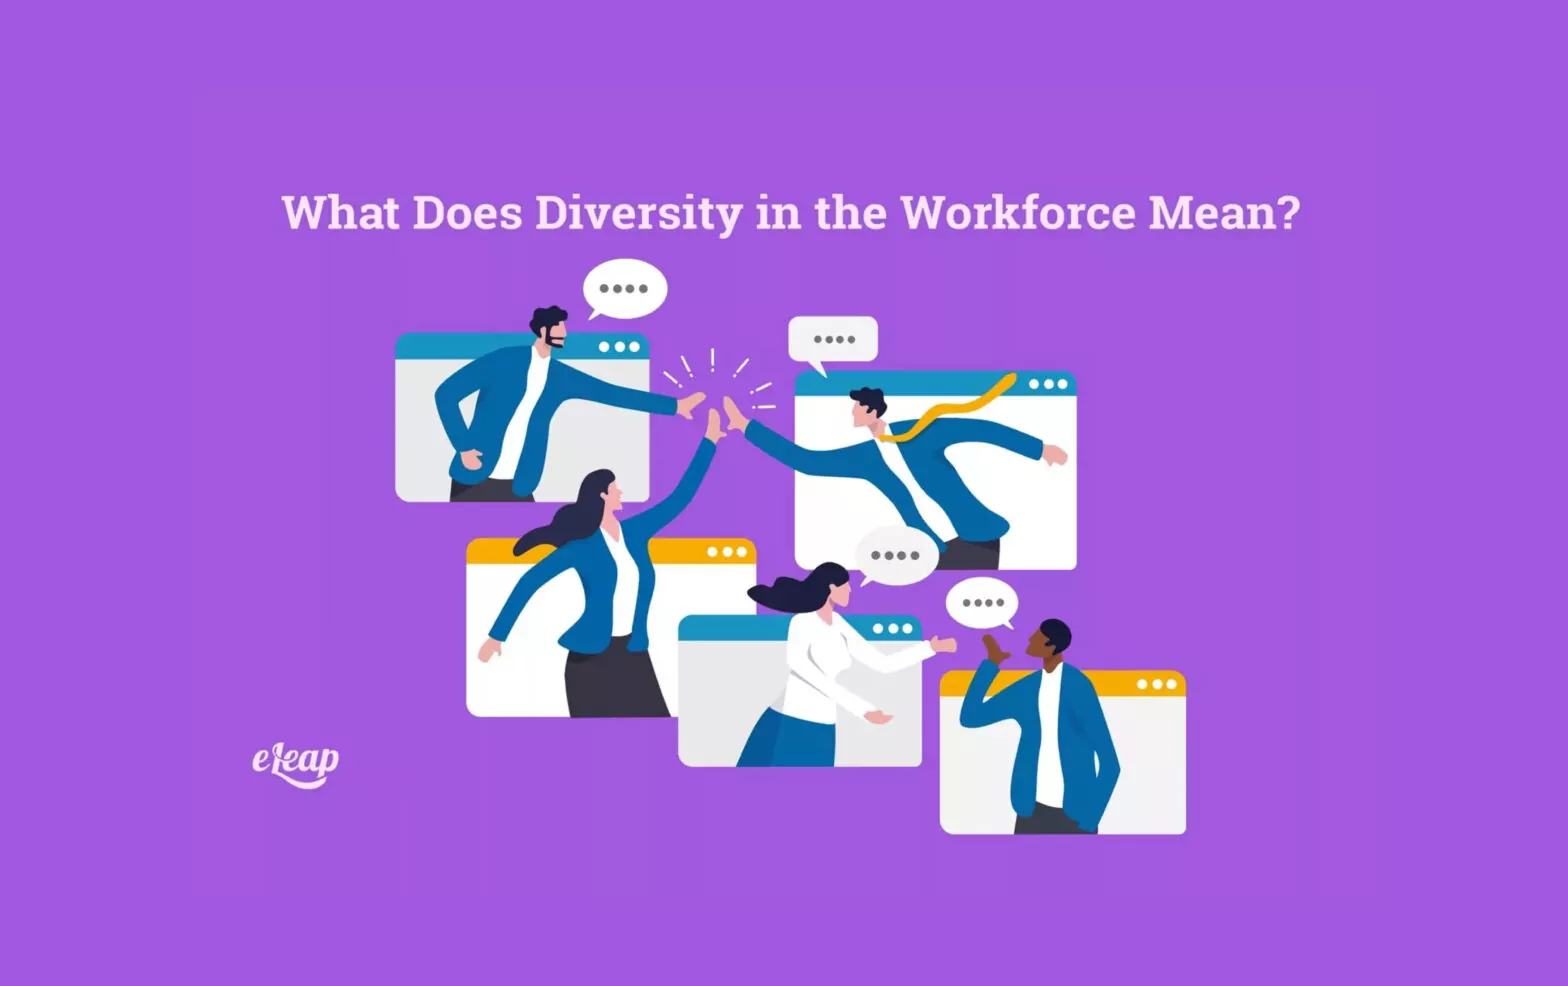 What Does Diversity in the Workforce Mean?